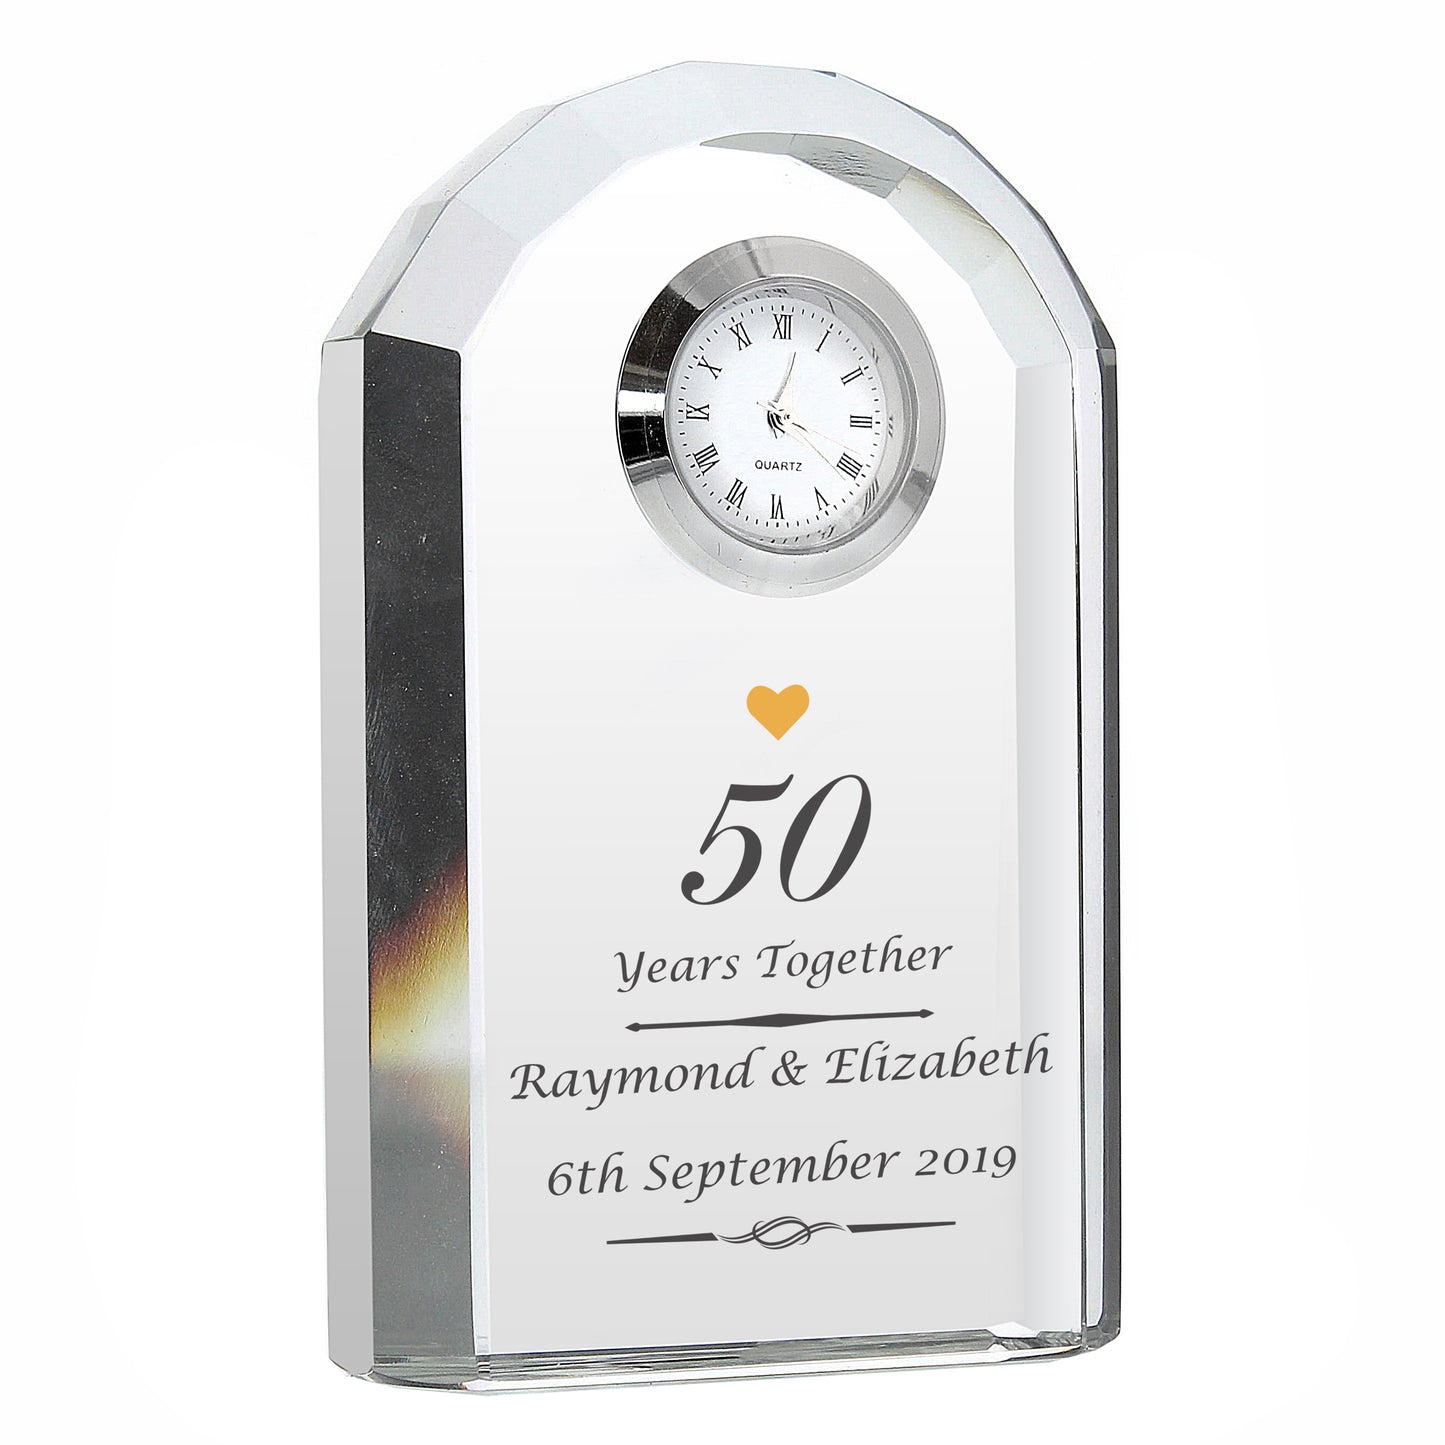 Personalised Golden Anniversary Crystal Clock - Personalise It!